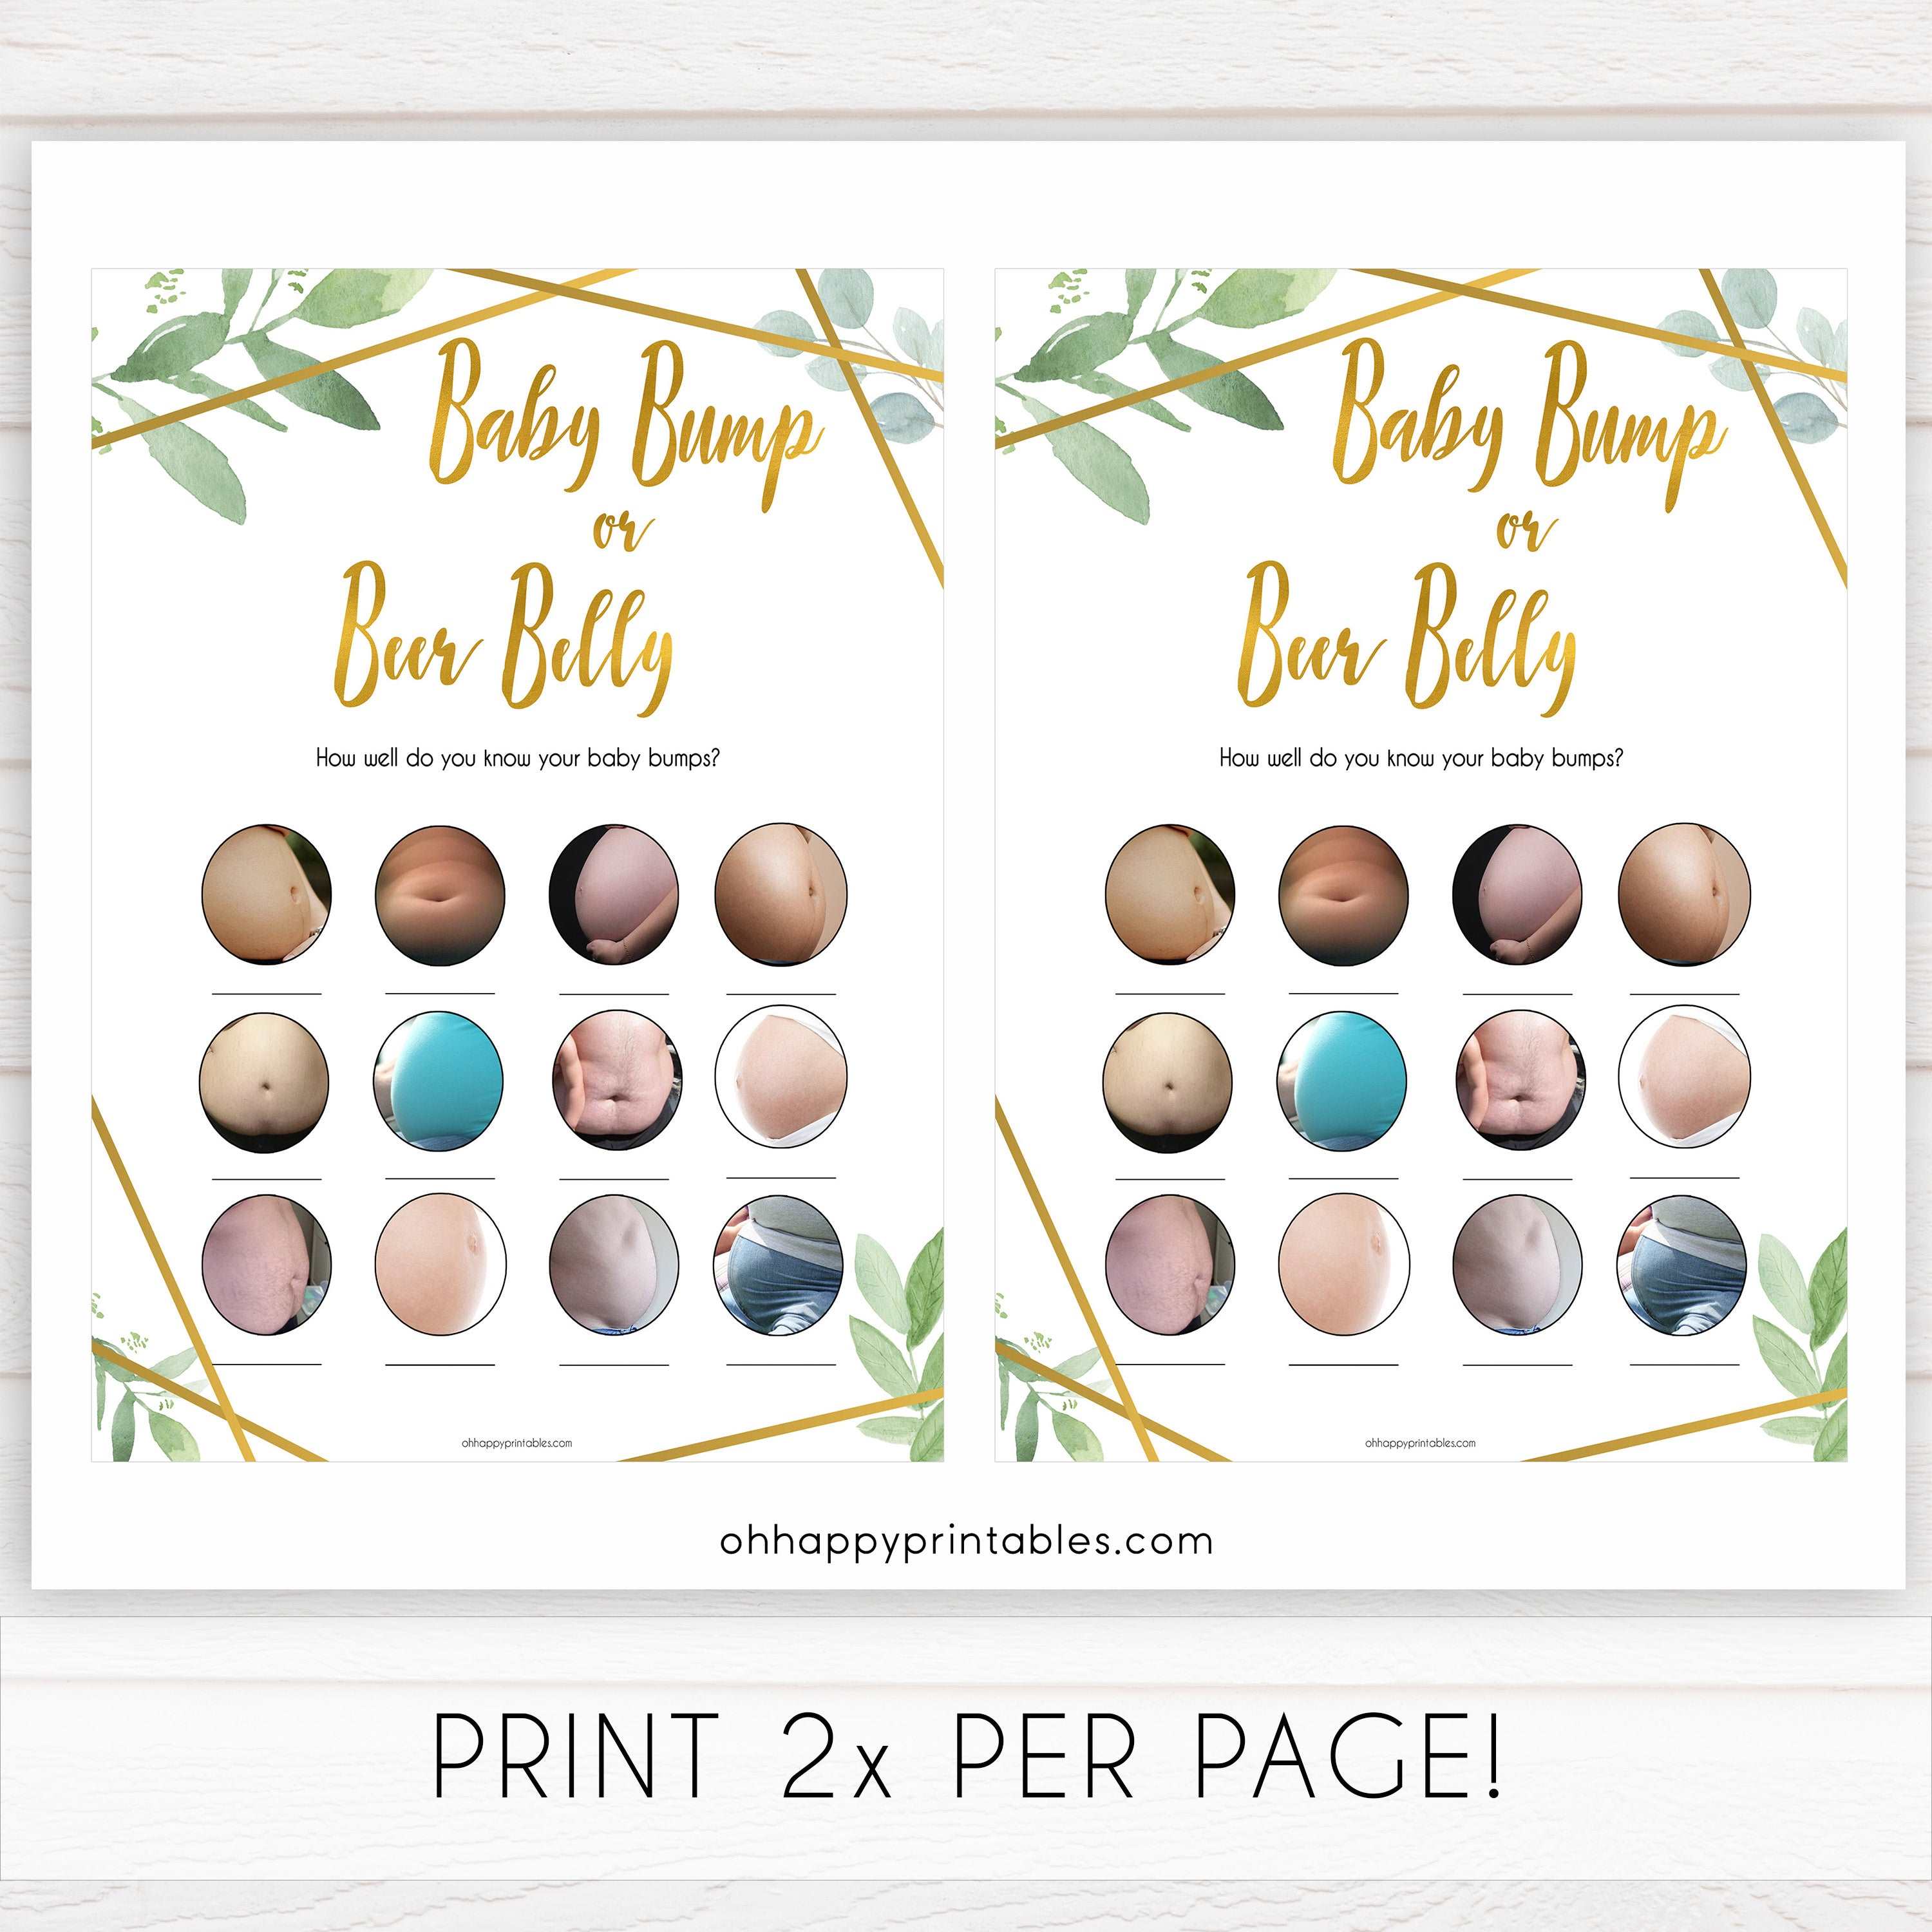 Bar Bur - Porn or Labor and Baby Bump or Beer Belly - Gold Geometric â€“  OhHappyPrintables